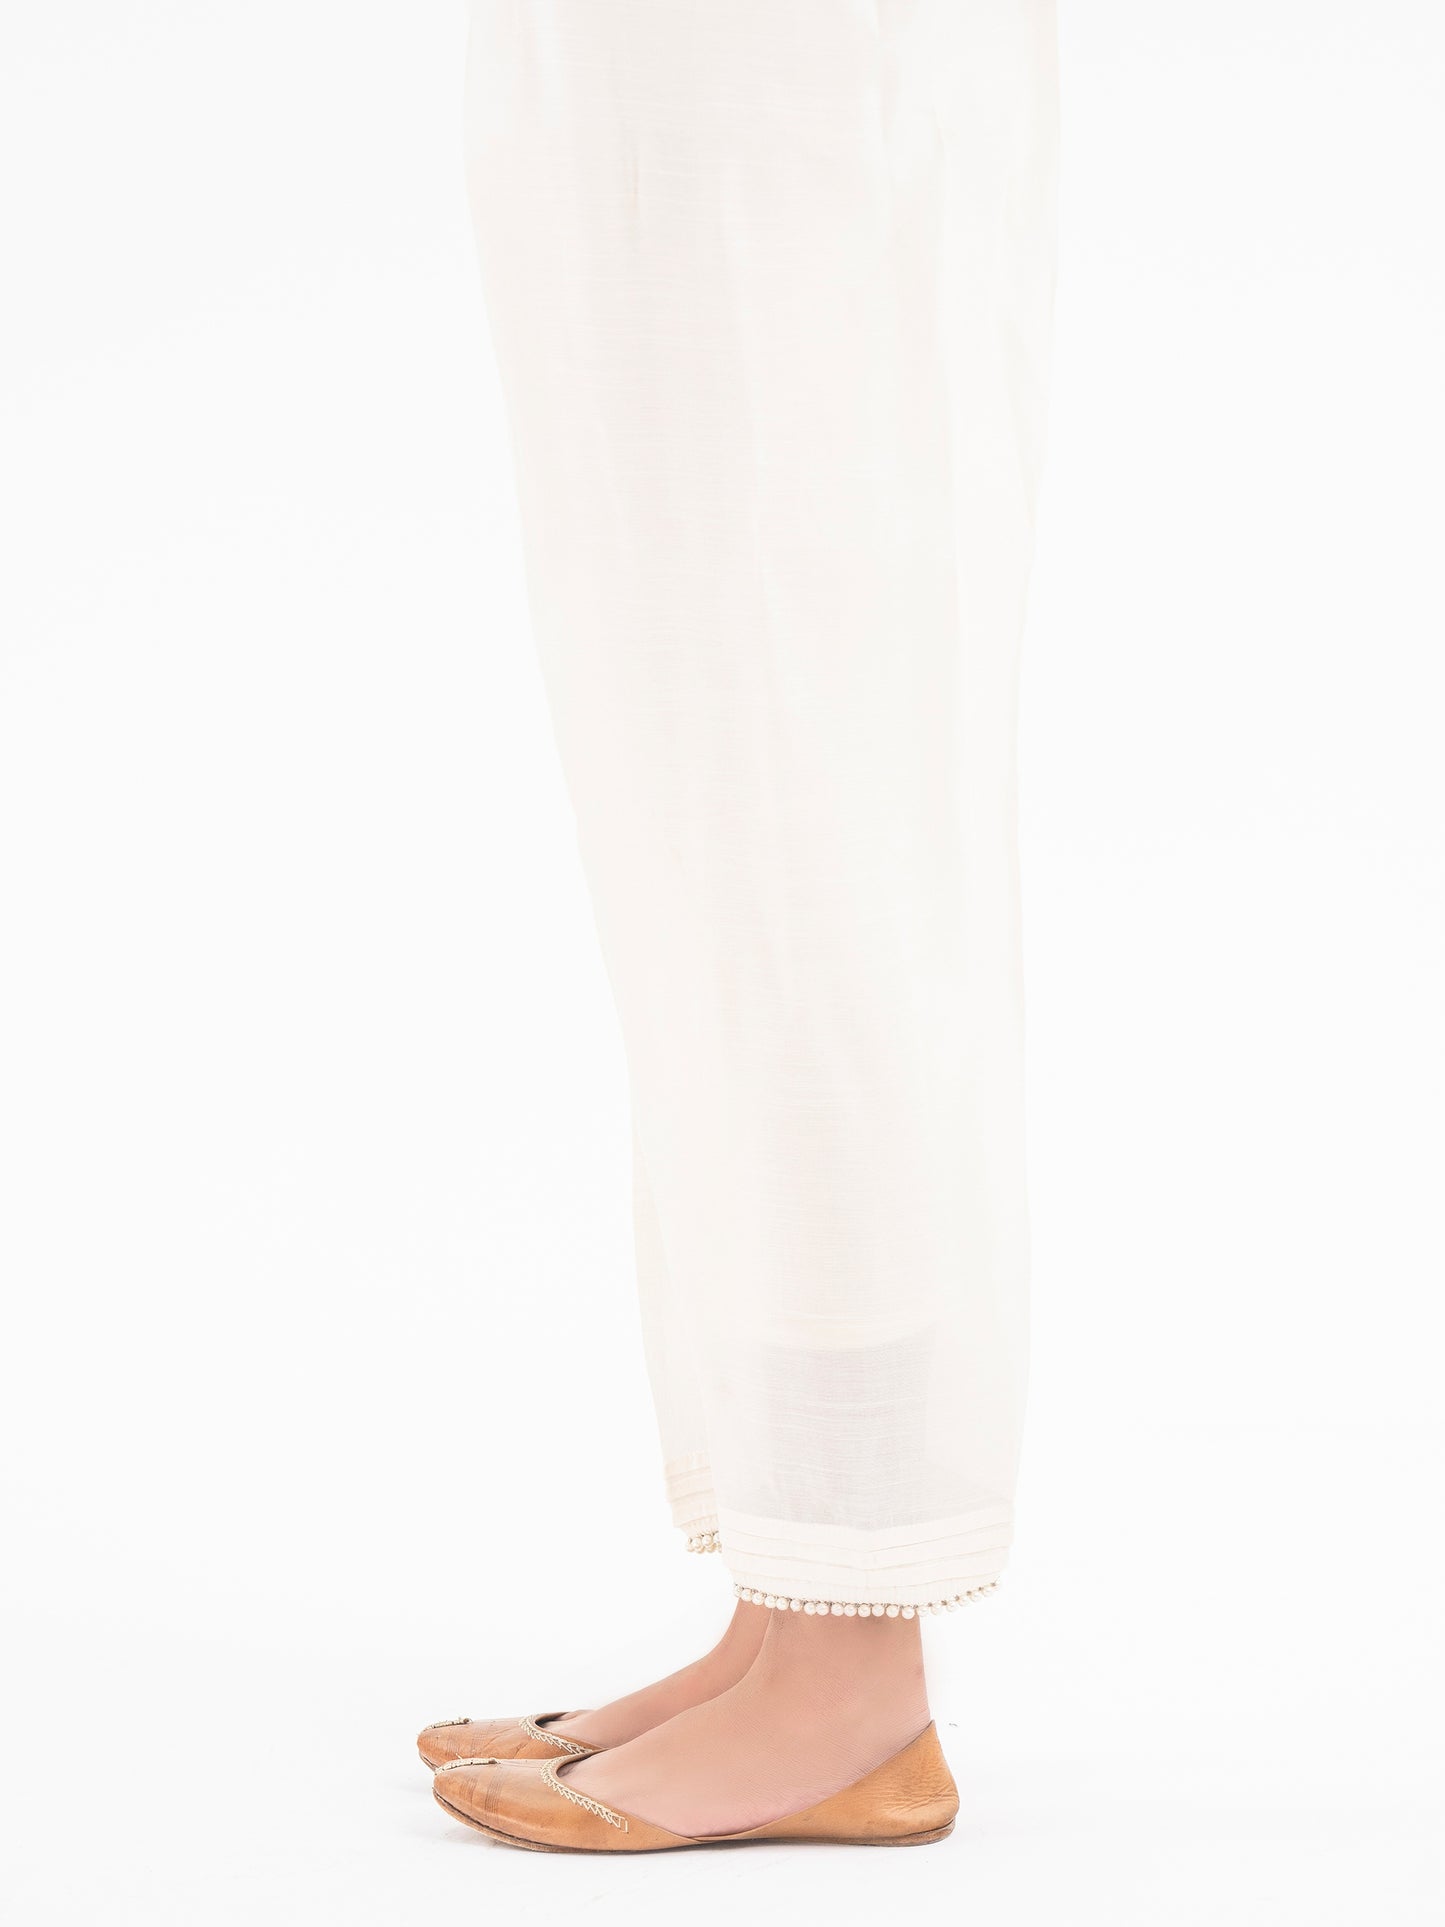 Dyed Raw Silk Trouser (Pret)